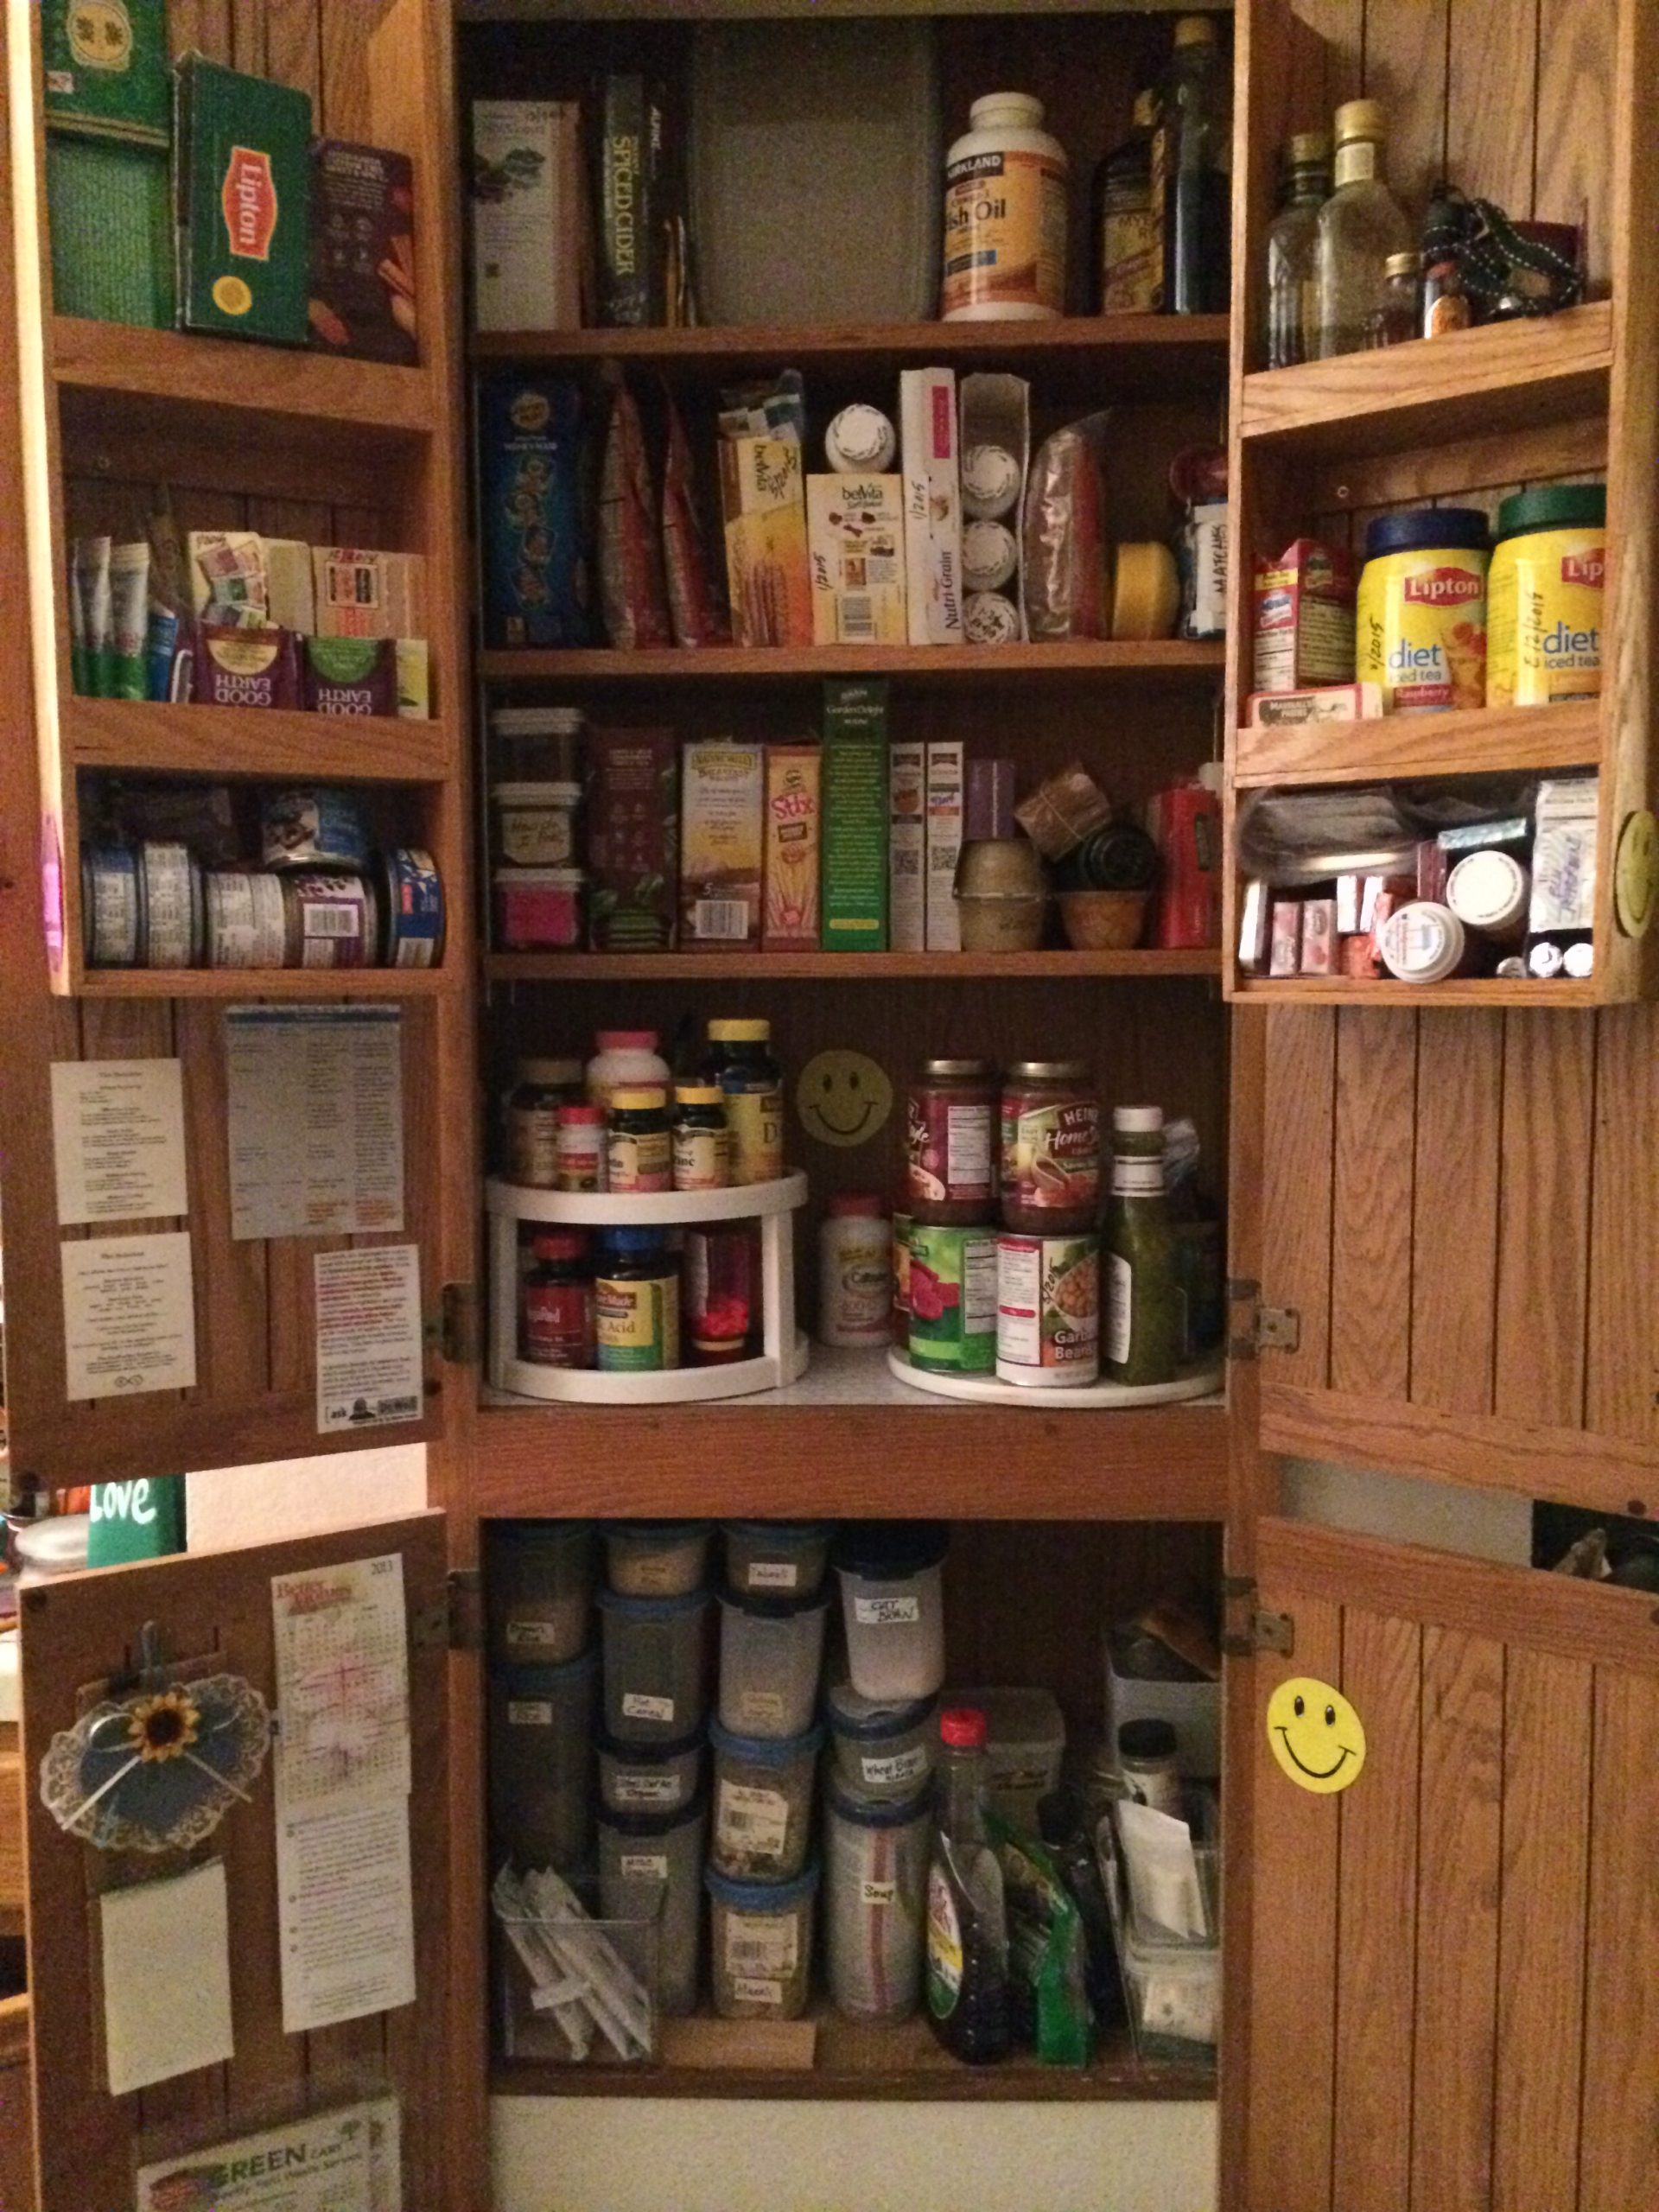 The Patient Organizer can help you organize your pantry